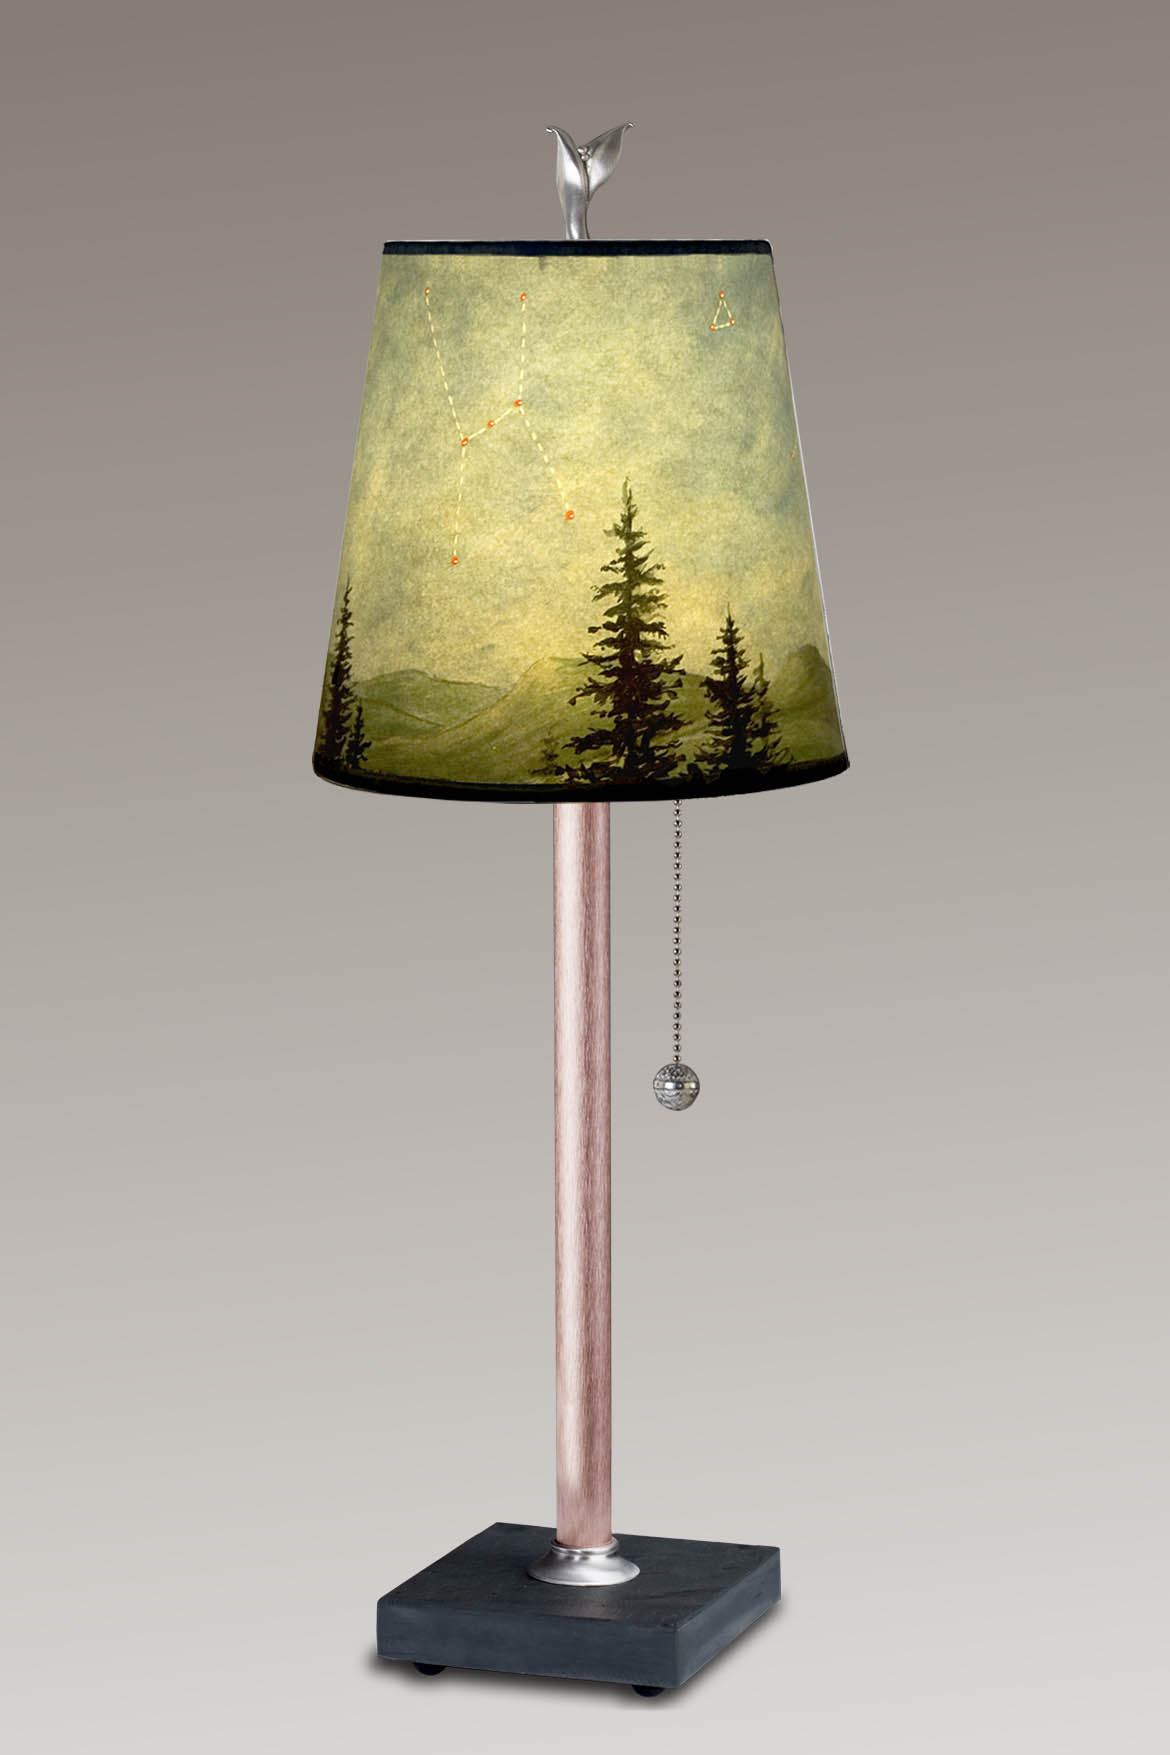 Janna Ugone &amp; Co Table Lamps Copper Table Lamp with Small Drum Shade in Midnight Sky